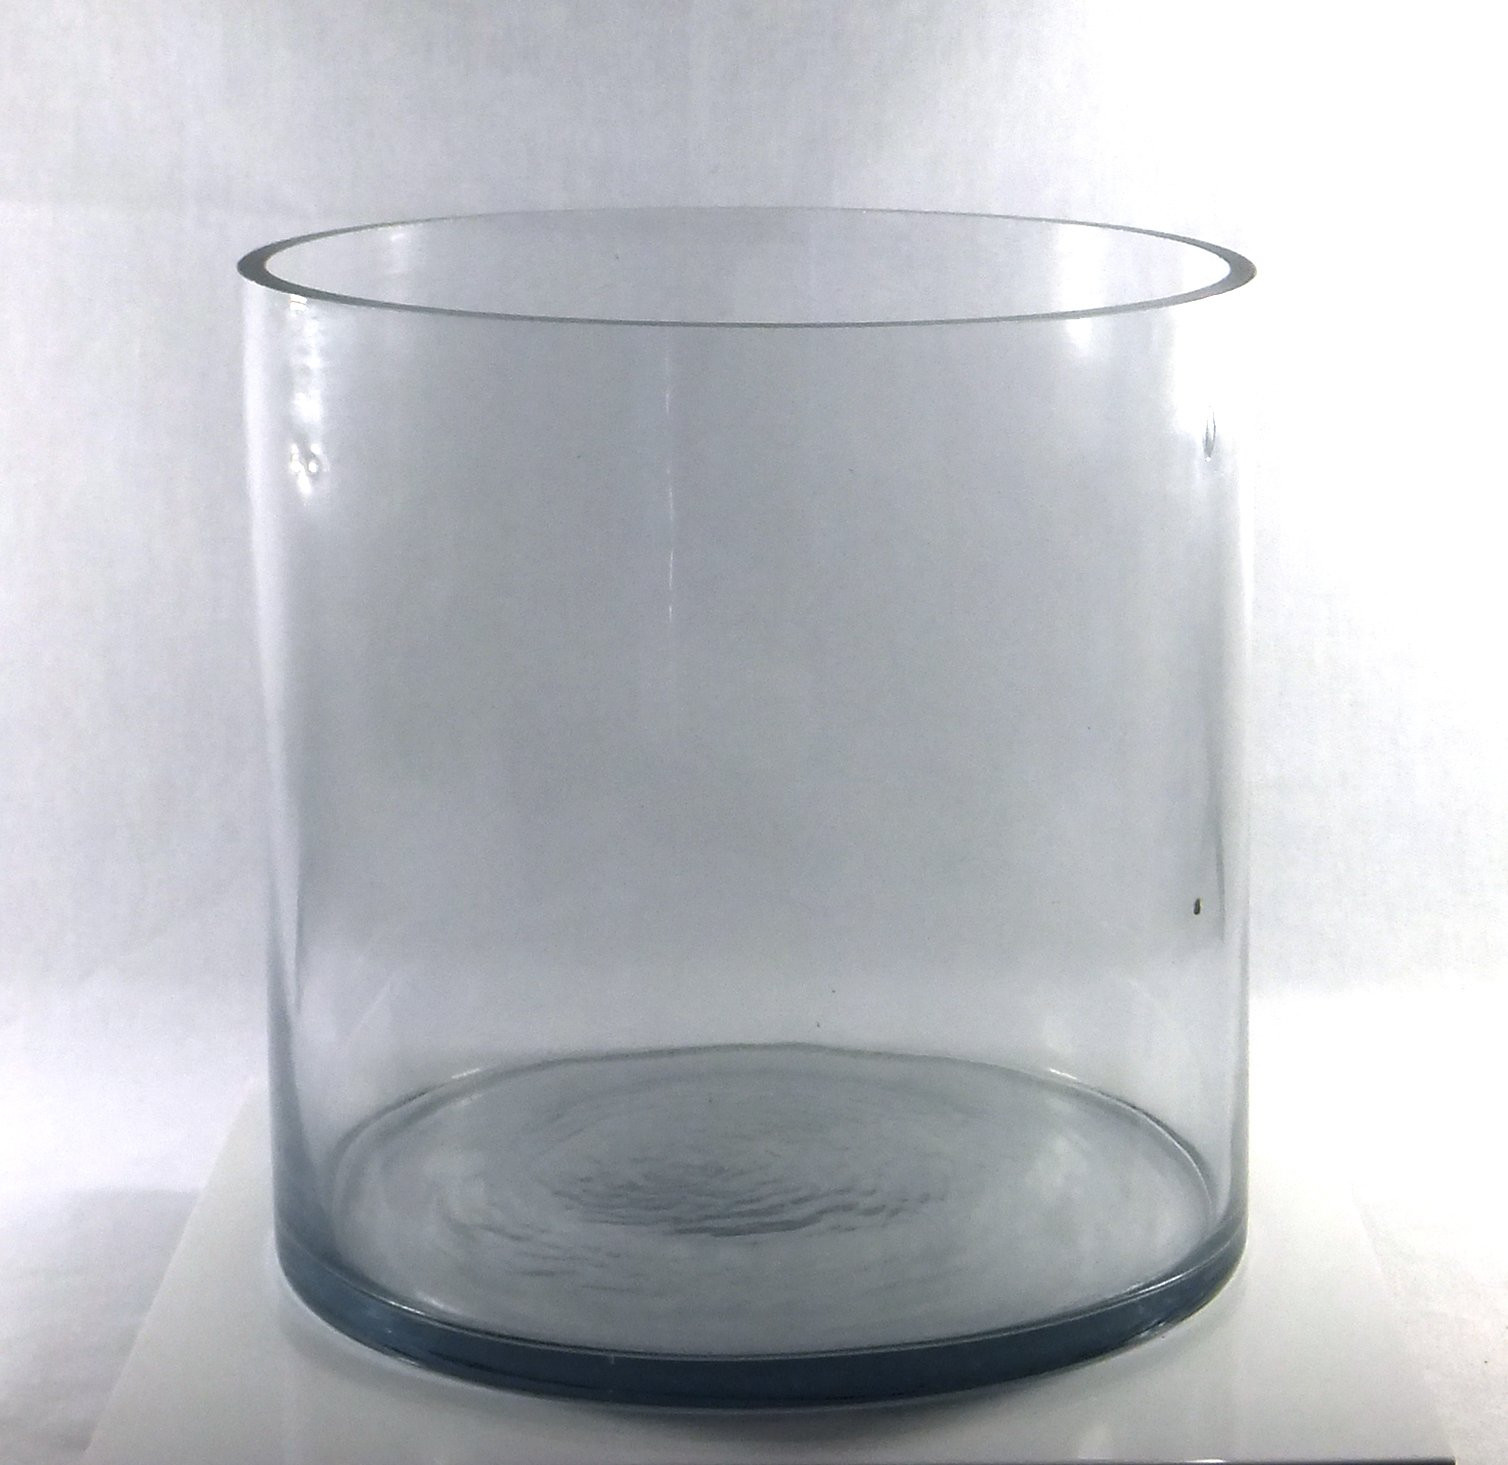 12 Cute Clear Plastic Vase Liners 2024 free download clear plastic vase liners of buy 8 inch round large glass vase 8 clear cylinder oversize intended for 8 inch round large glass vase 8 clear cylinder oversize centerpiece 8x8